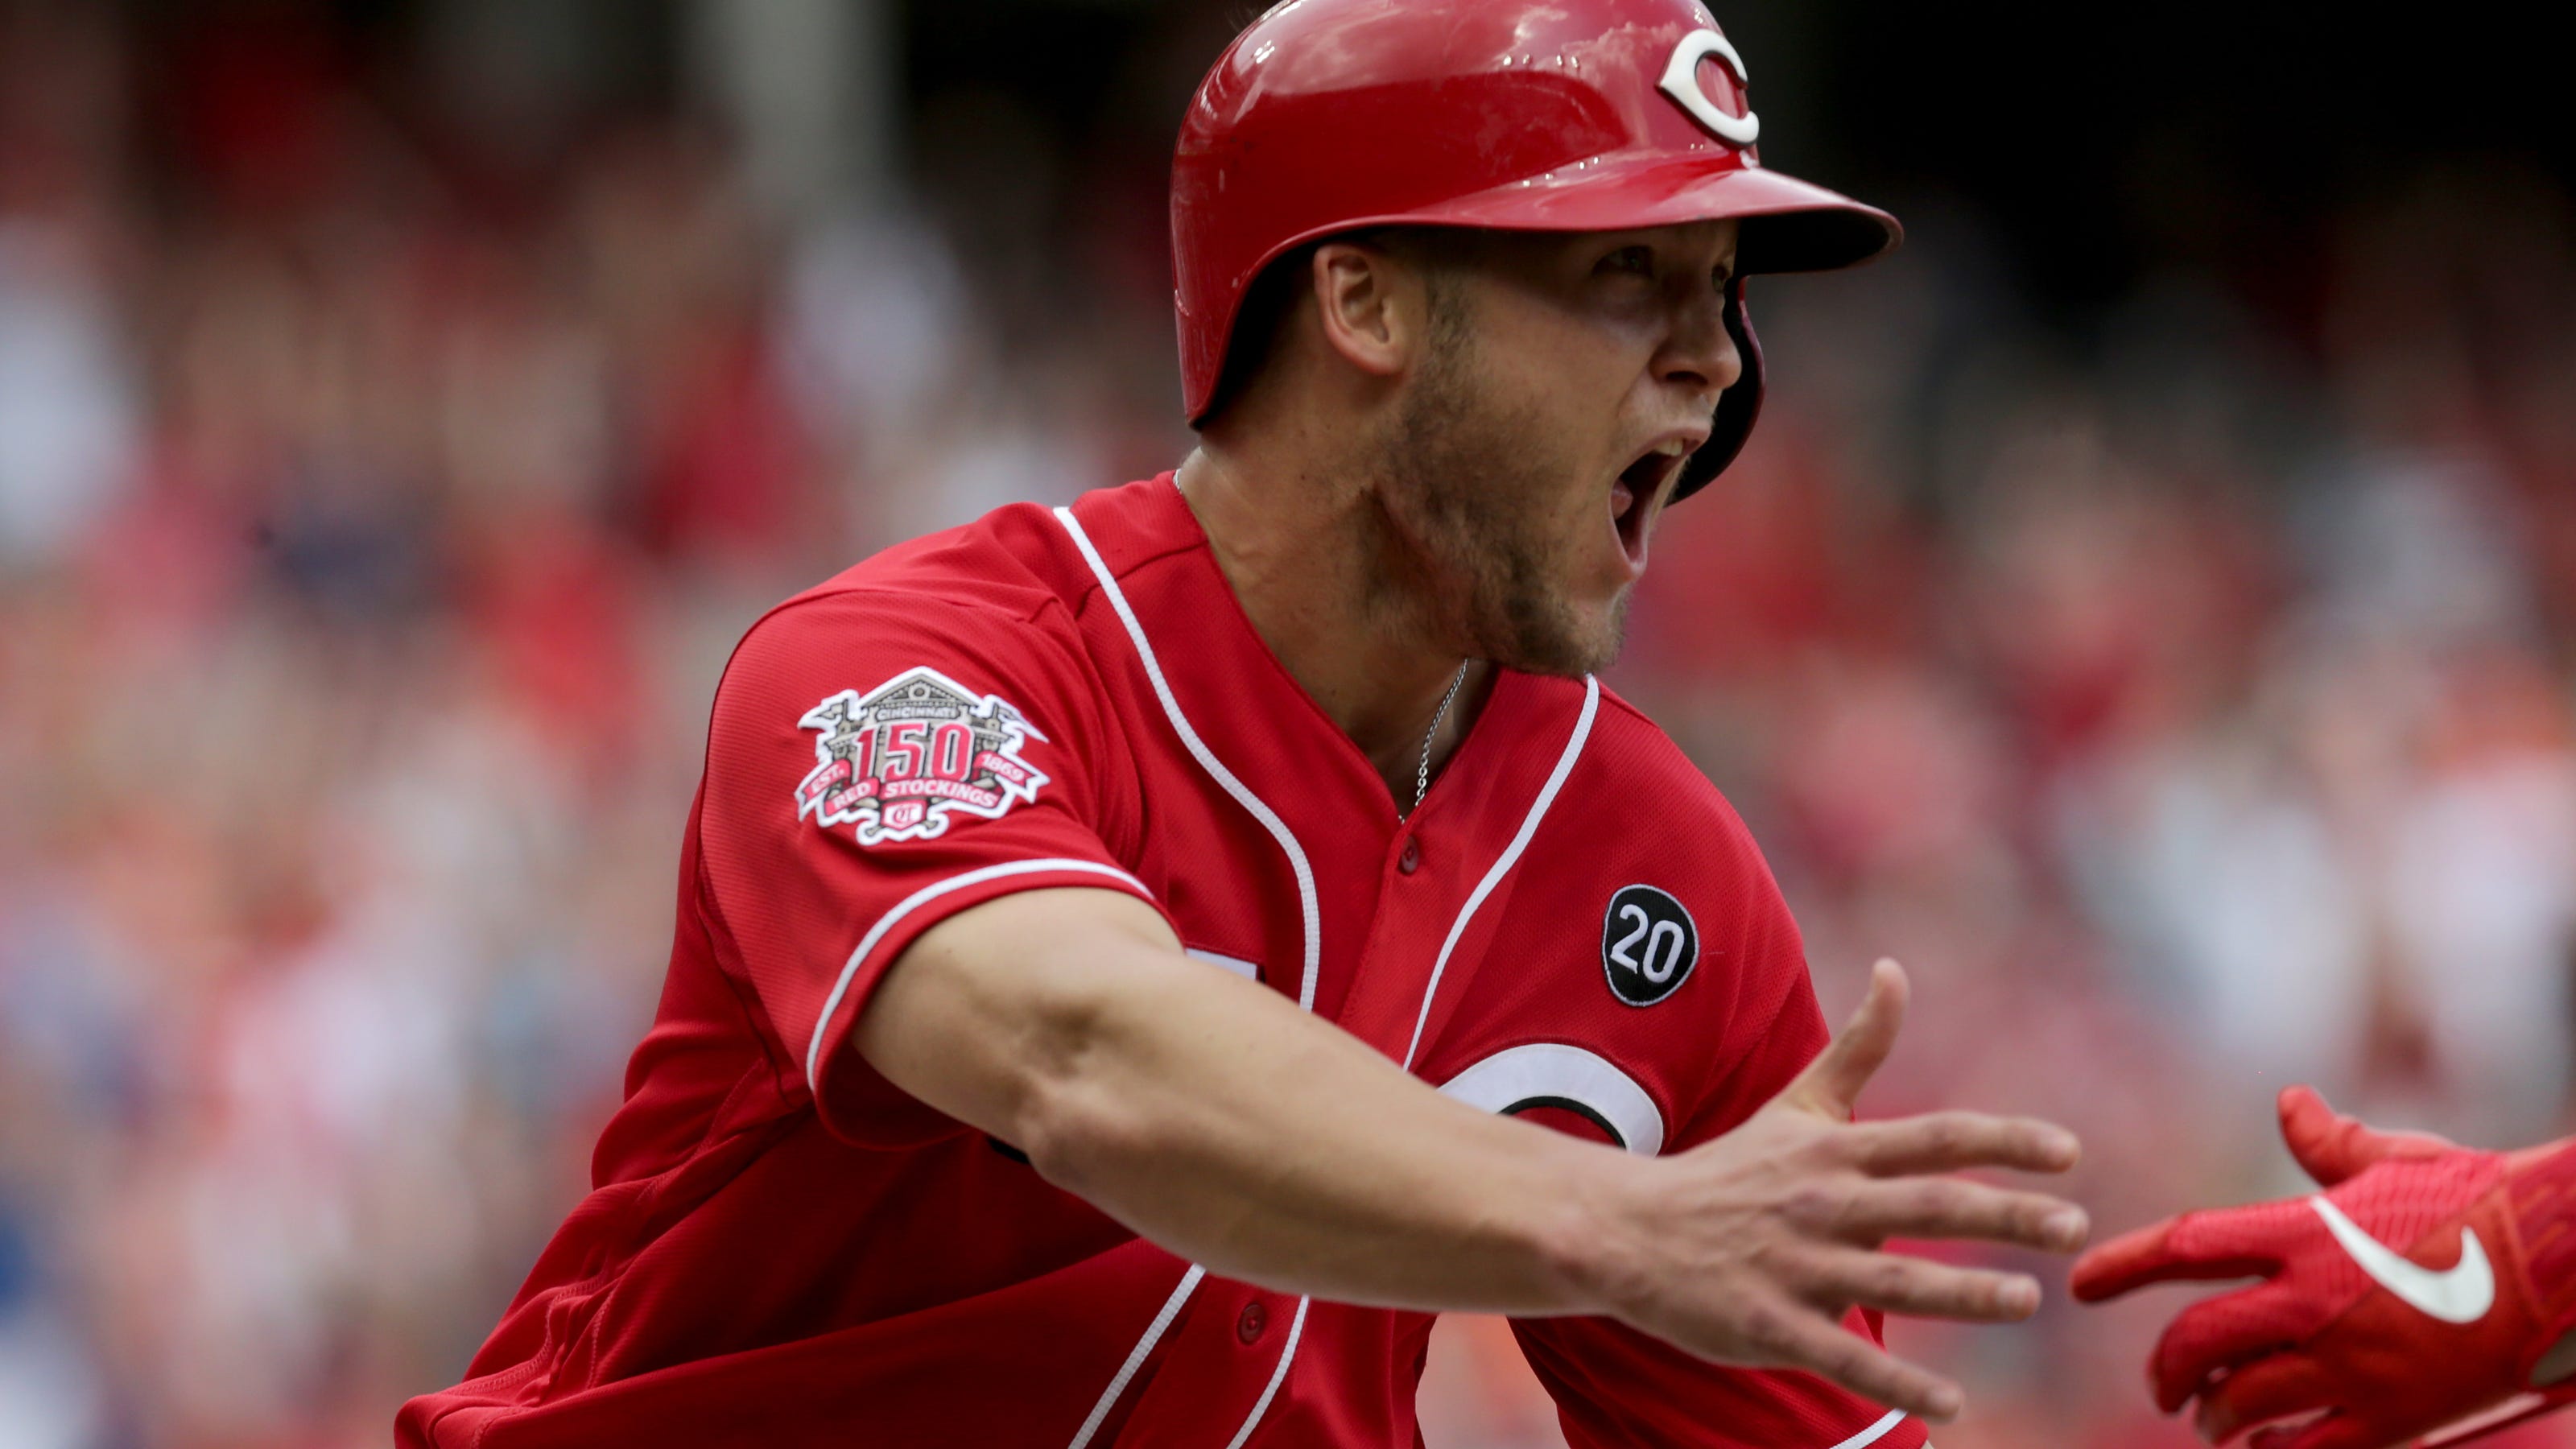 The Cincinnati Reds, on 5game streak, have gained a new confidence